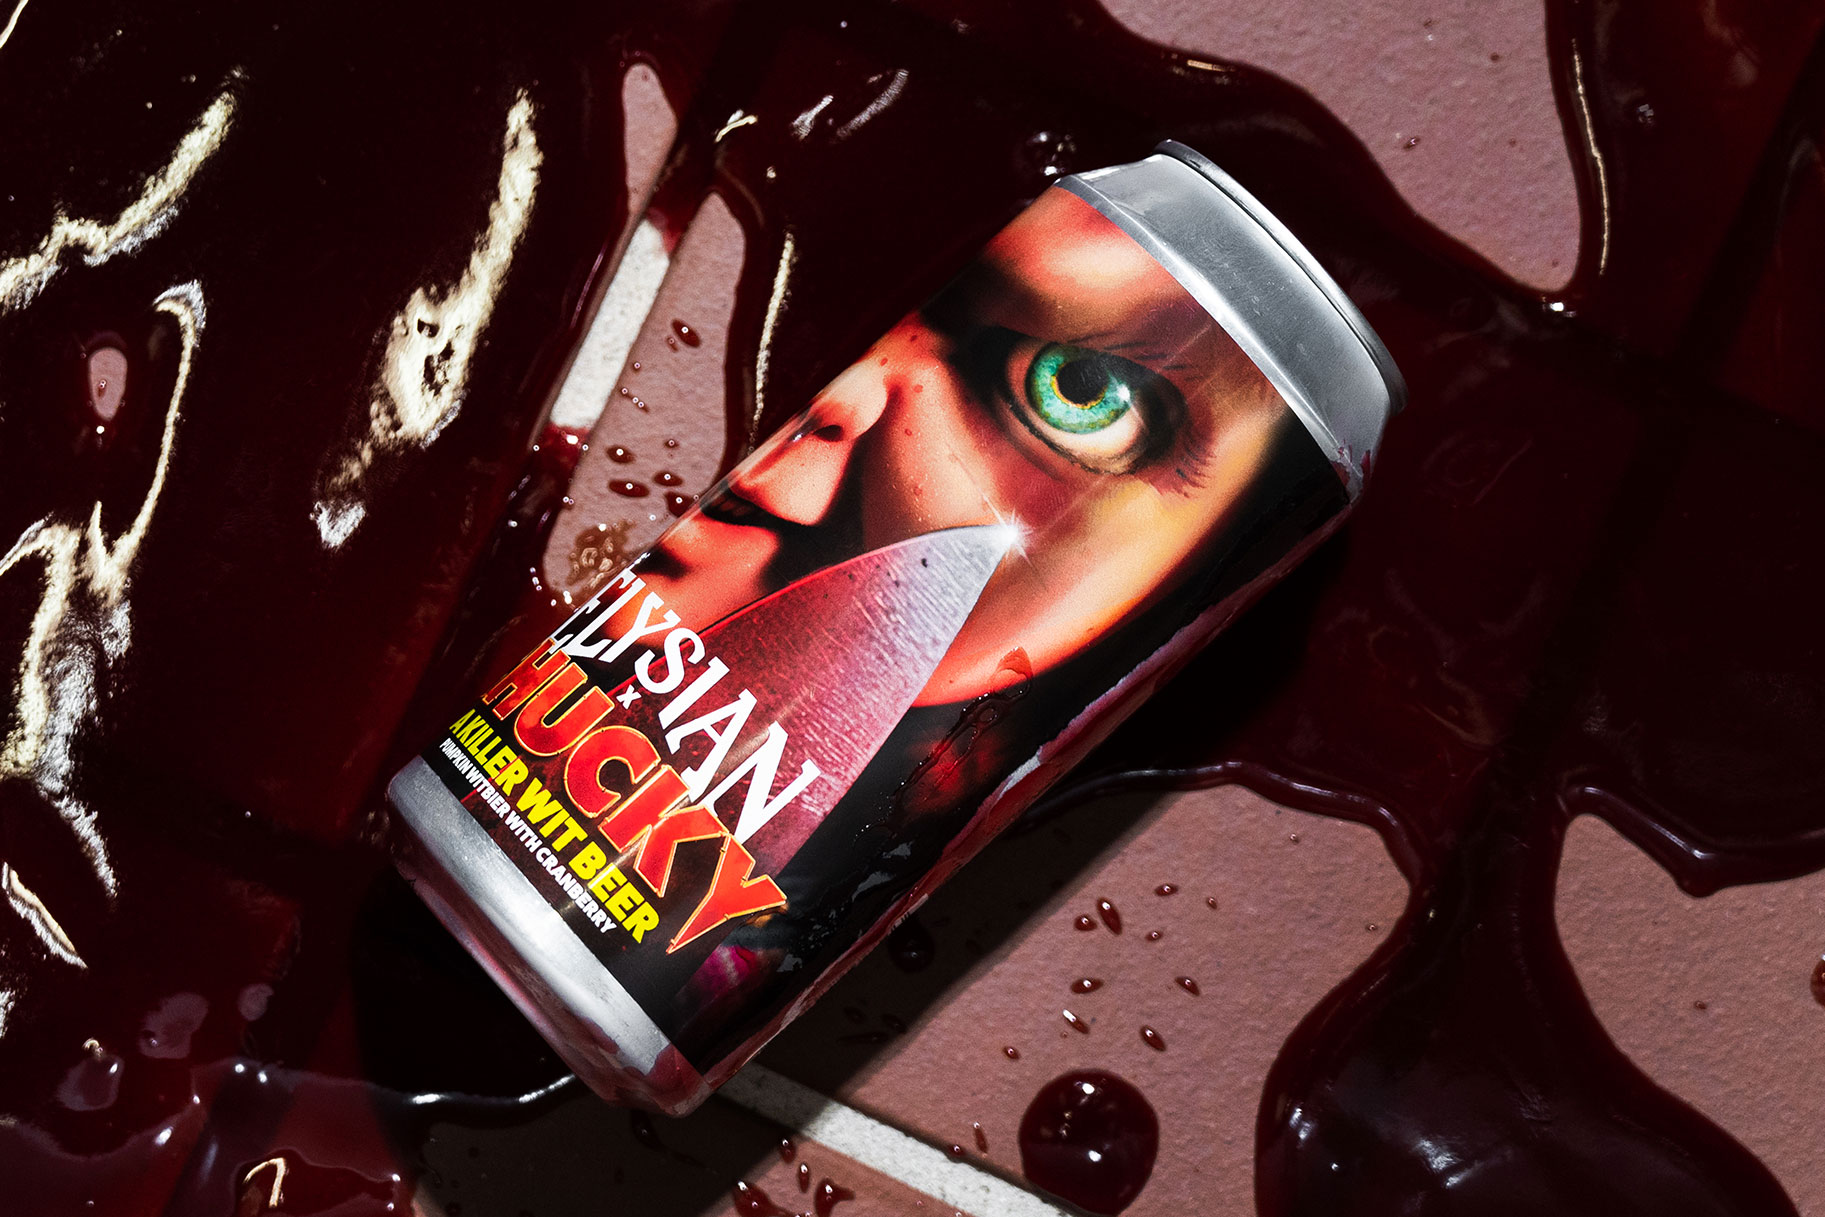 A can of Chucky beer laid in a puddle of blood